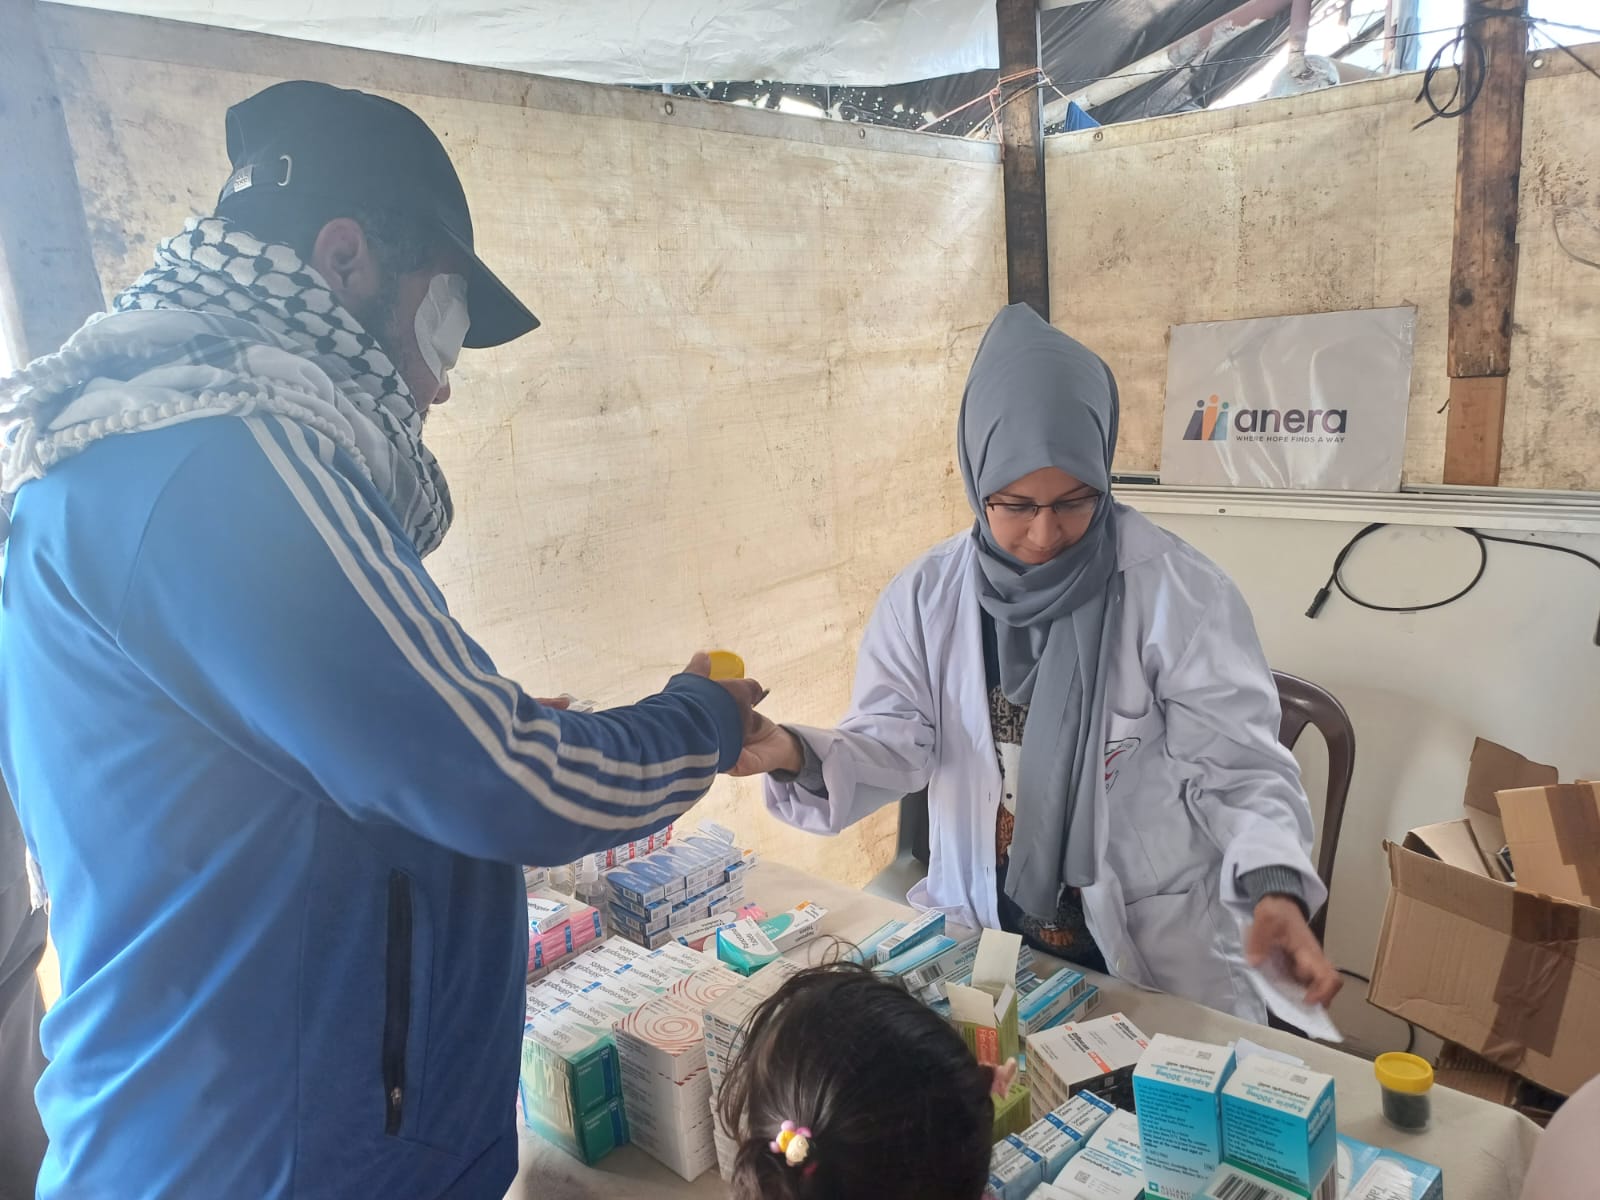 Newsletter: 1,150 People Treated at Health Clinic in Palestine and more updates